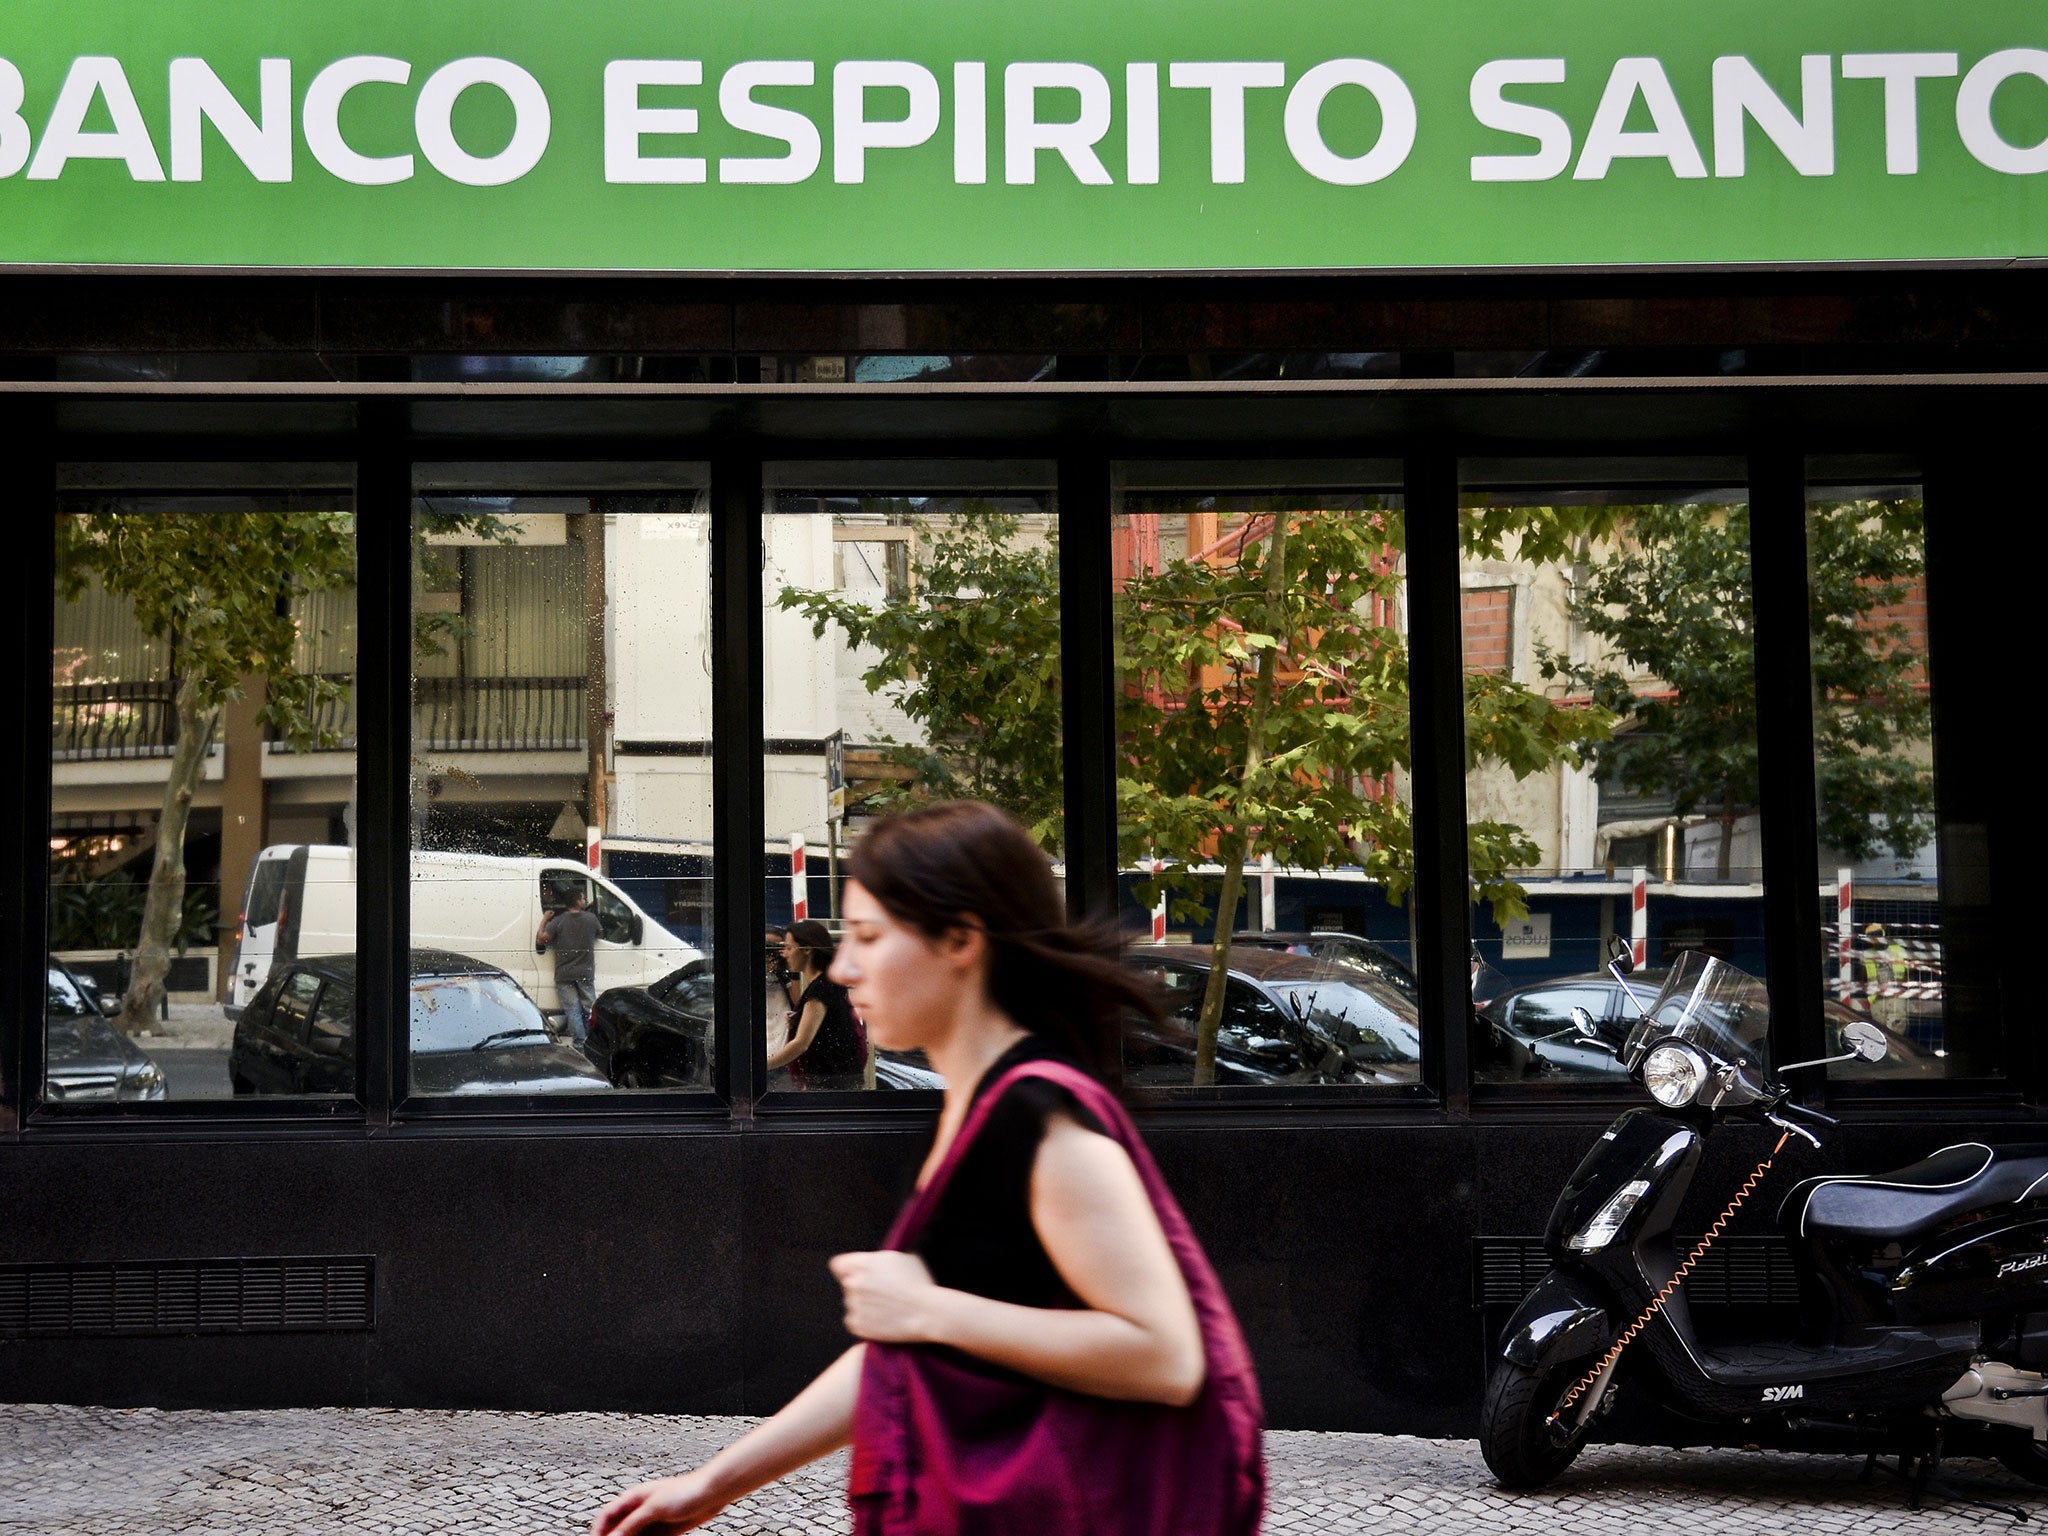 Fears over the health of Portugal's largest listed bank, Banco Espirito Santo, sent its shares into freefall thursday, shaking stock markets in Lisbon and across southern Europe.